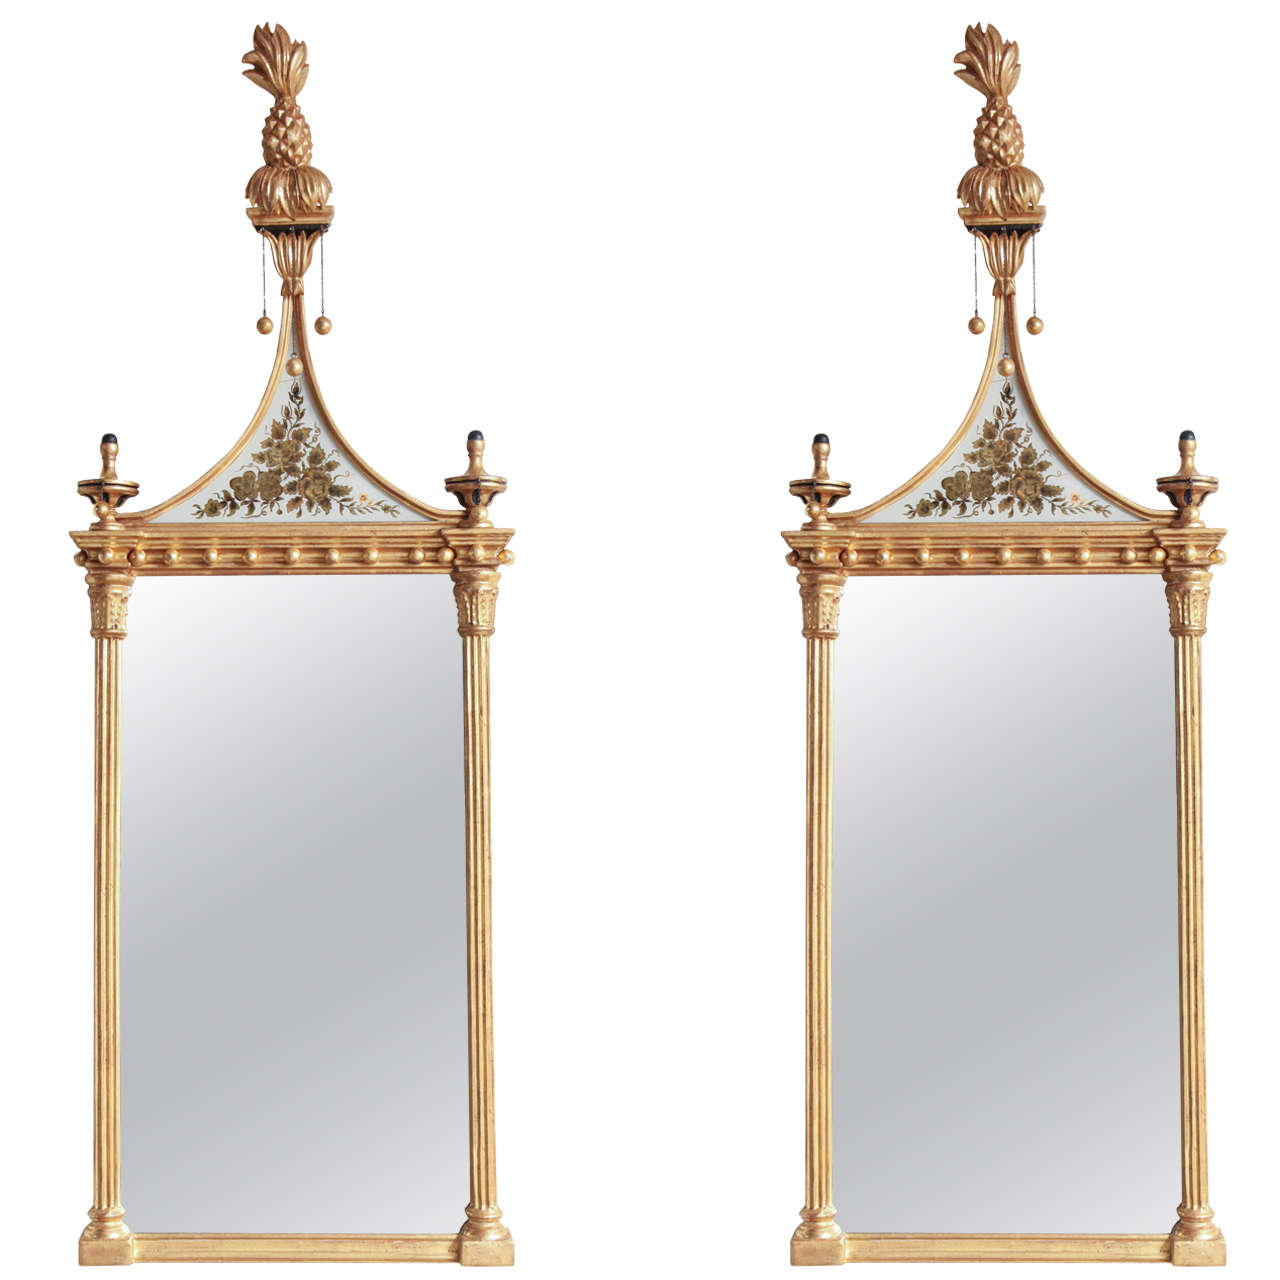 Pair of Federal Pier Mirrors